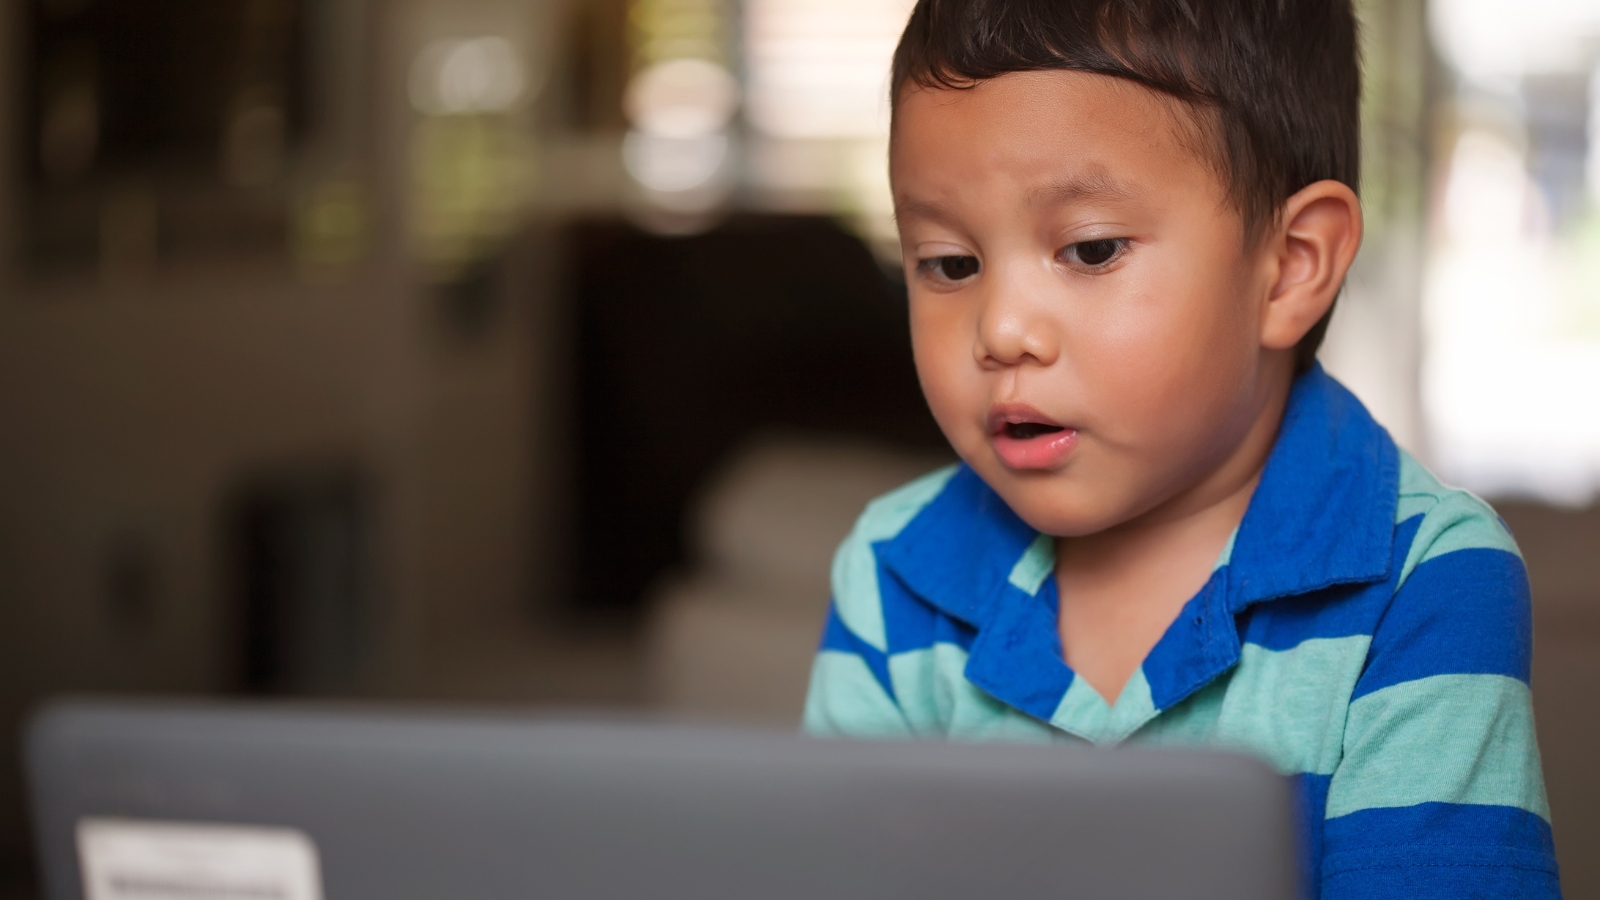 A photo of a young boy sitting at a desk, talking into a laptop computer. He is completing a voice-enabled literacy assessment, powered by SoapBox Labs' voice AI technology for kids.